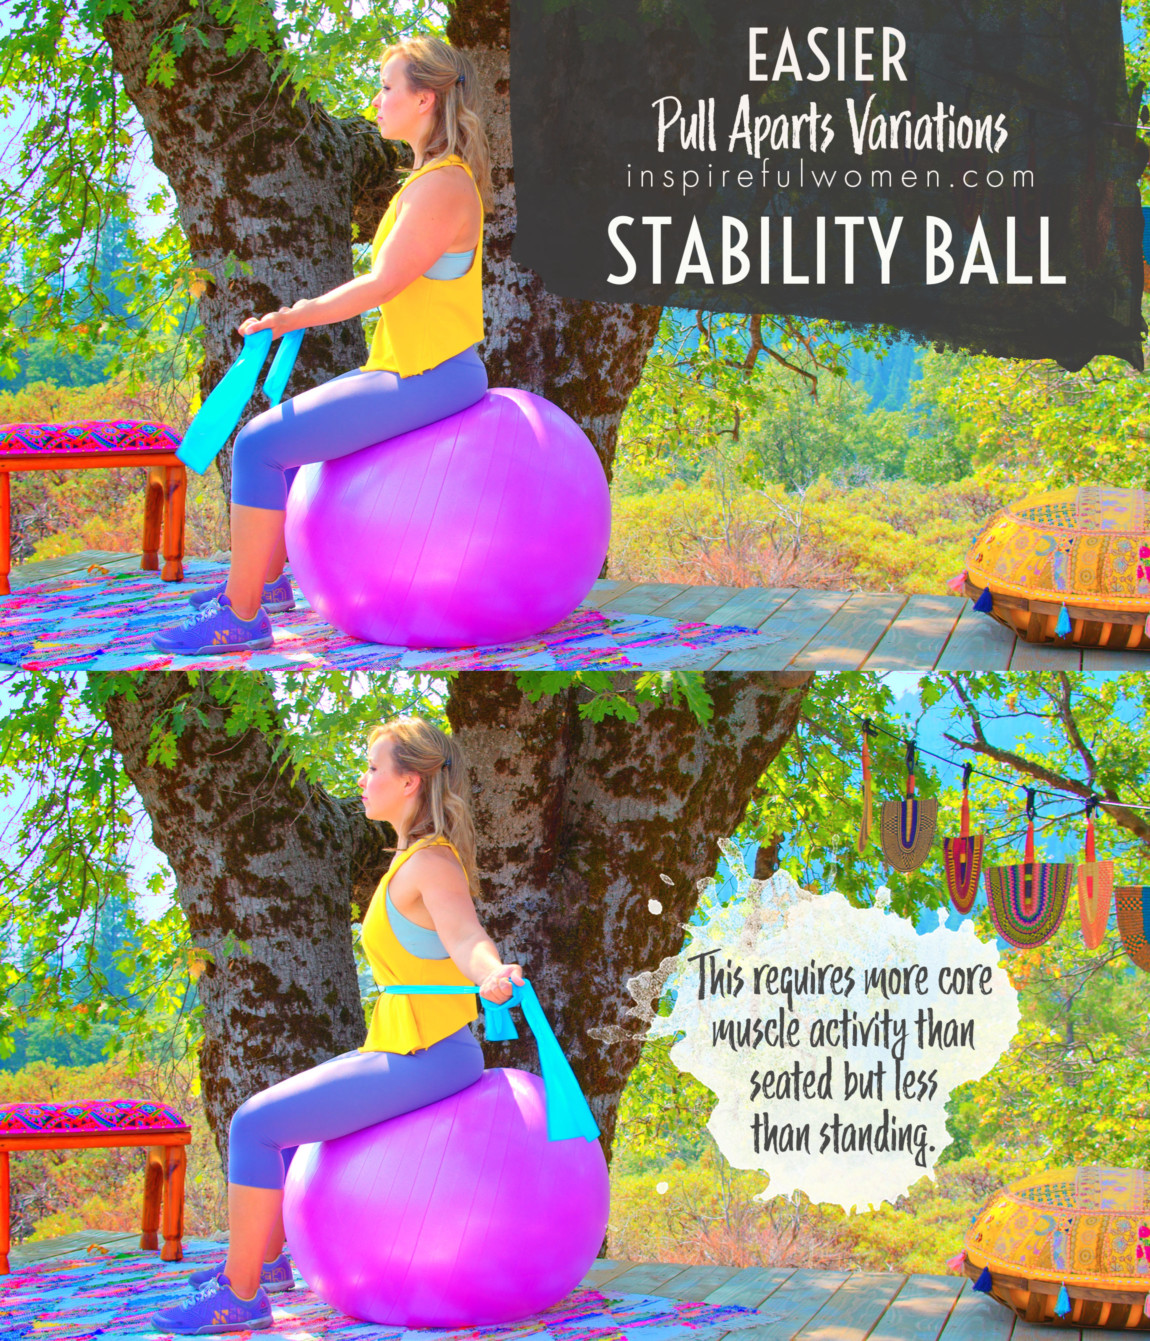 stability-ball-banded-pull-aparts-seated-exercise-at-home-variation-easier